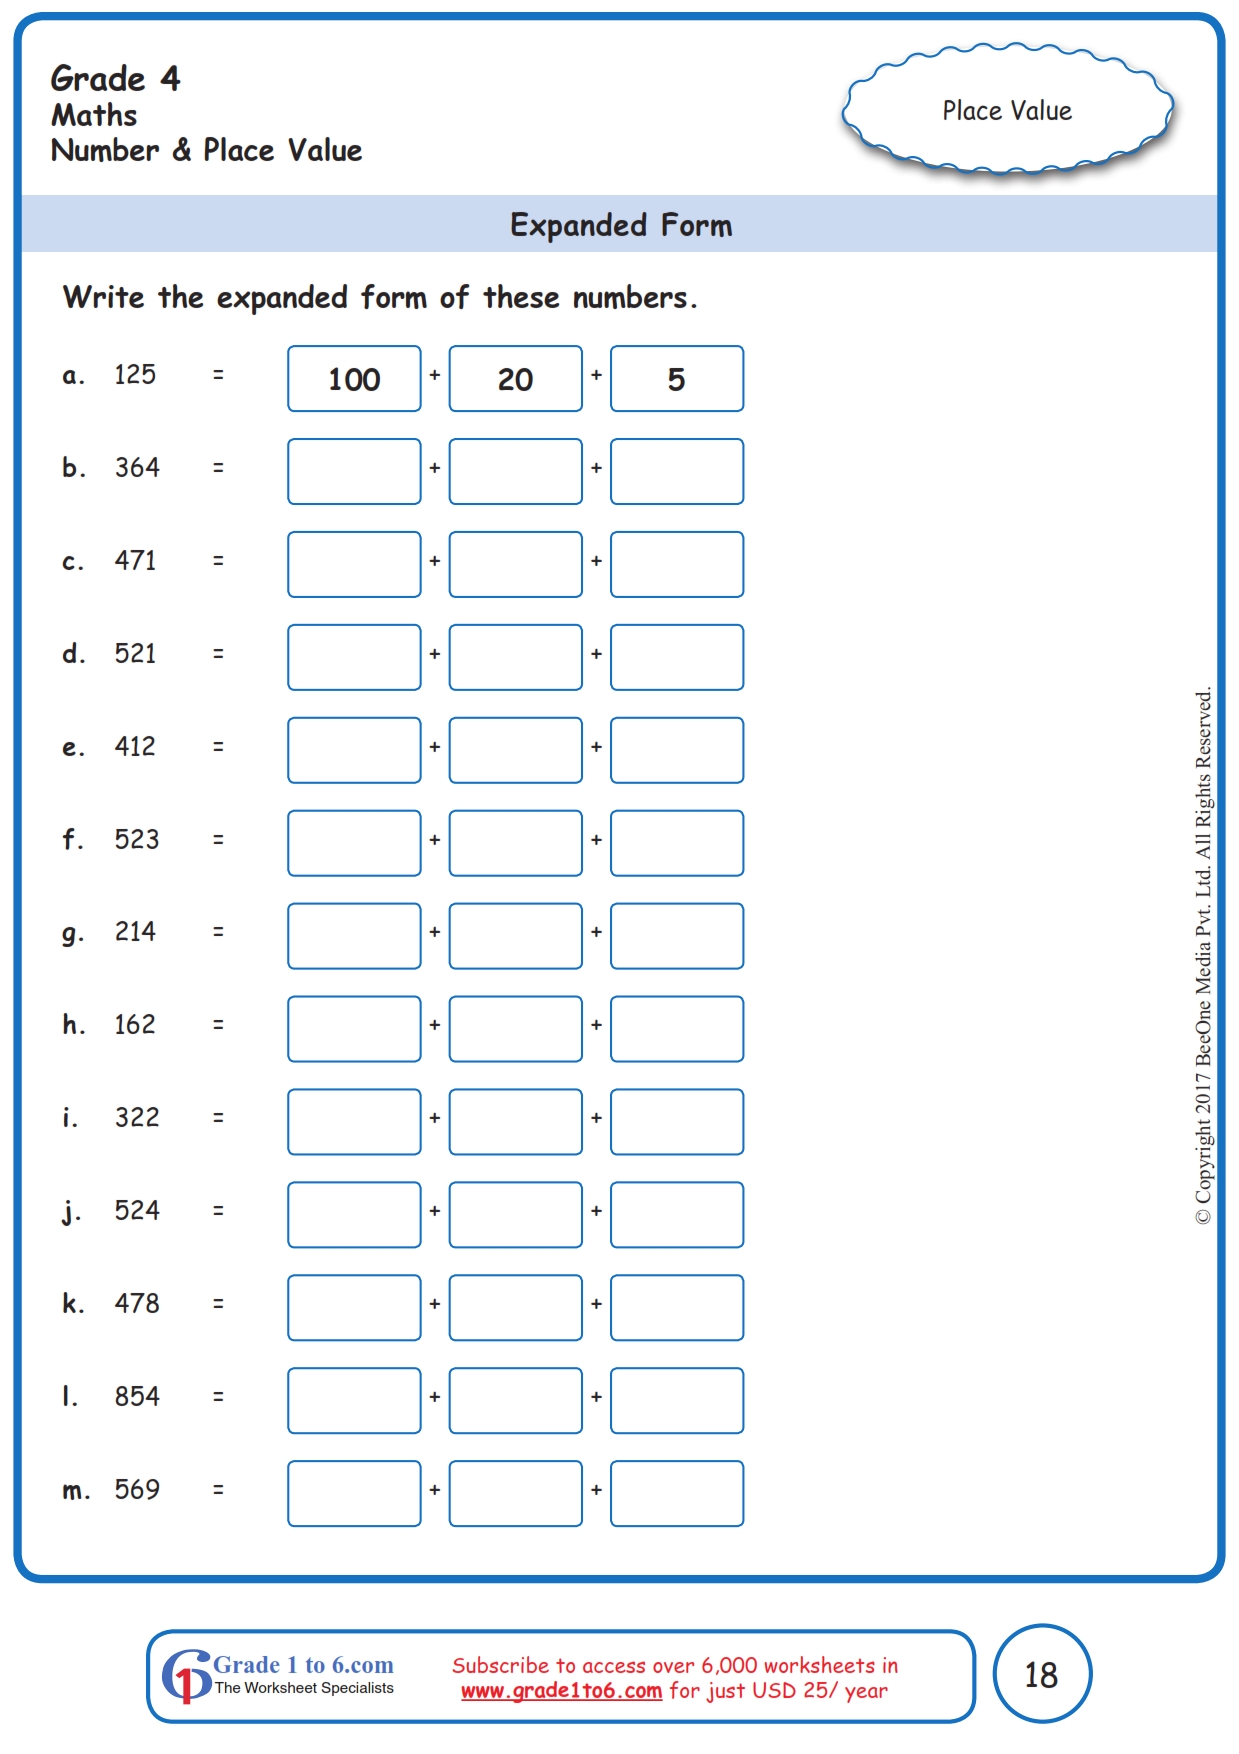 expanded-form-of-a-number-worksheets-grade-4-www-grade1to6